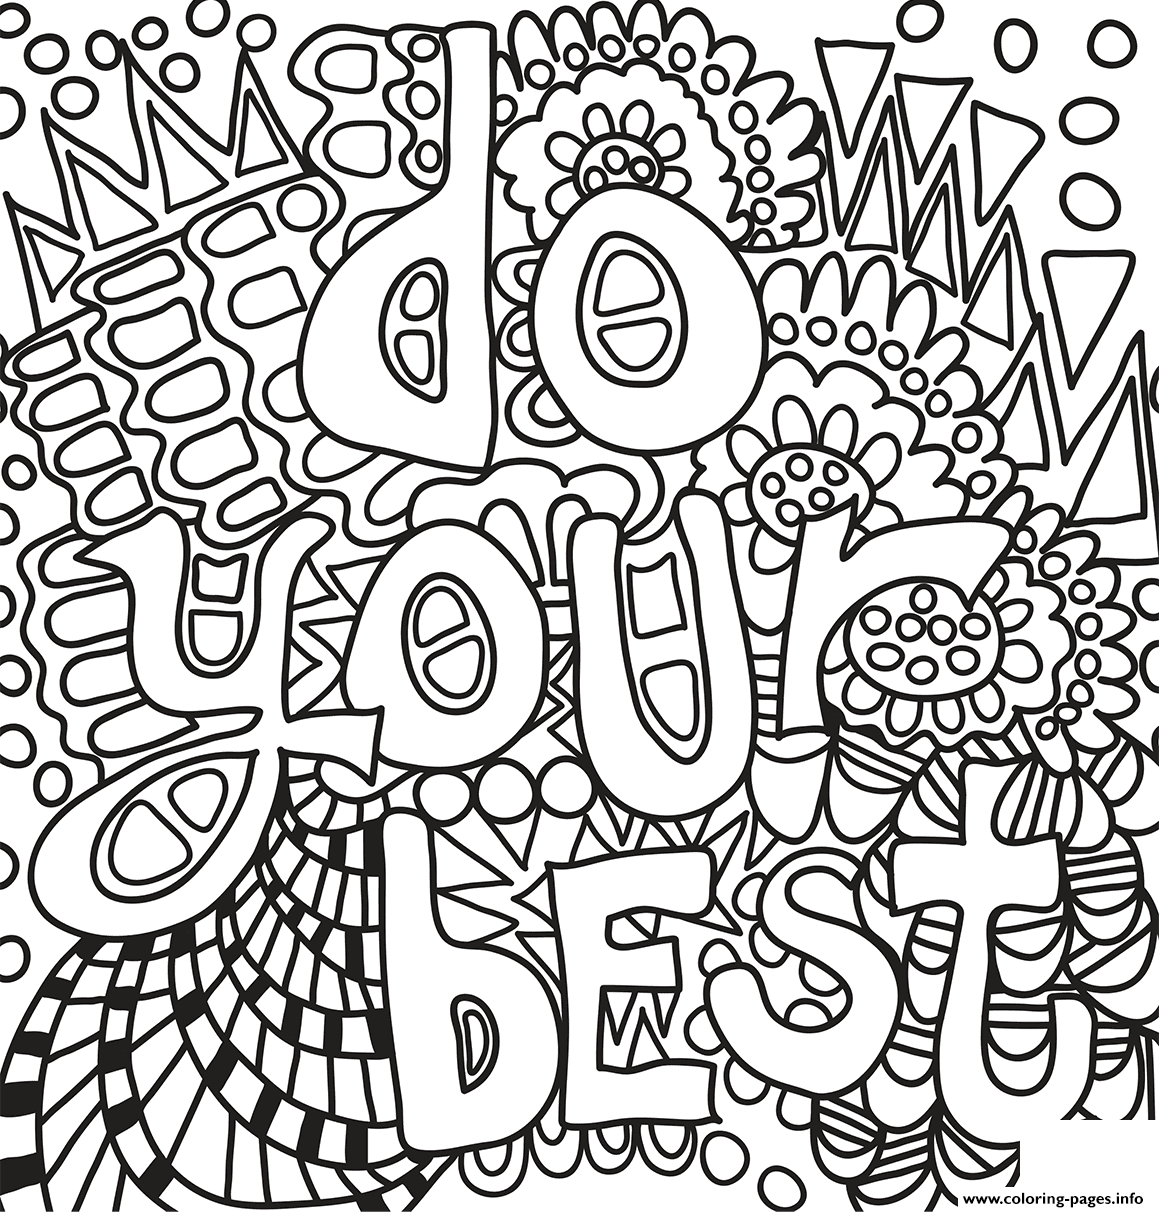 Do Your Best coloring